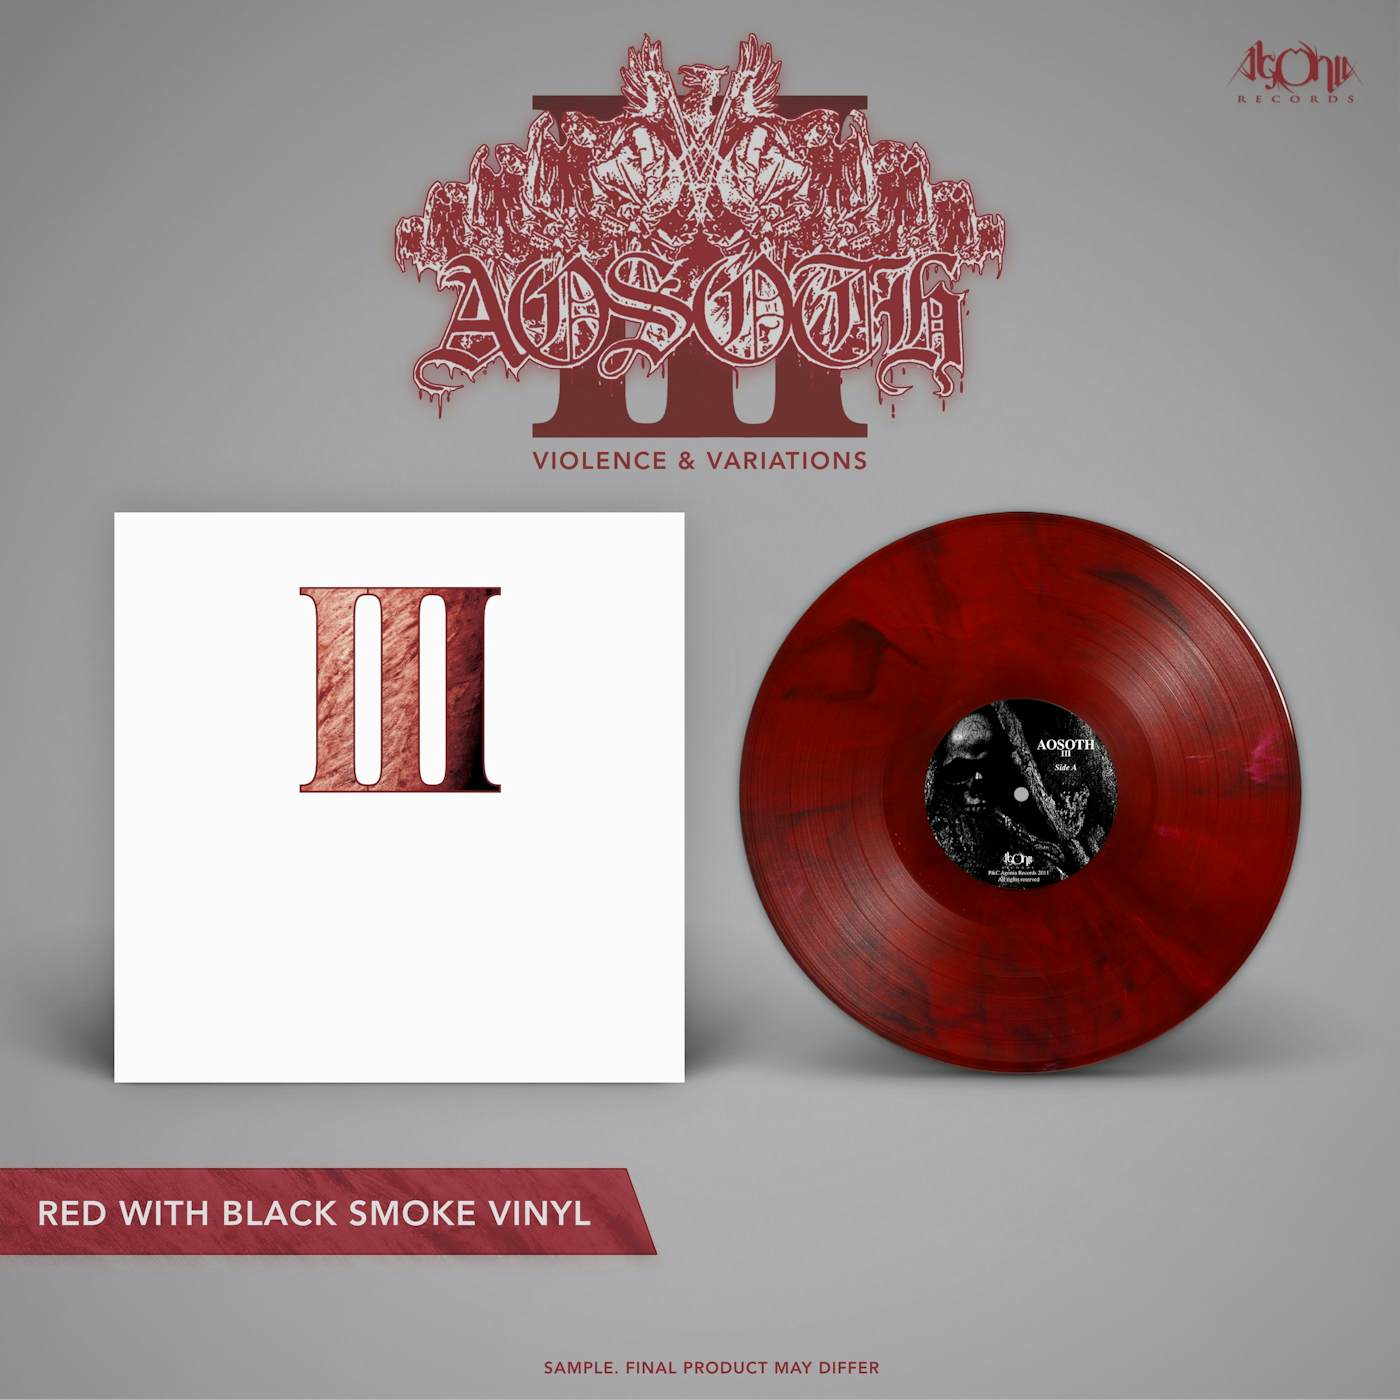 Aosoth "III: Violence & Variations" Limited Edition 12"